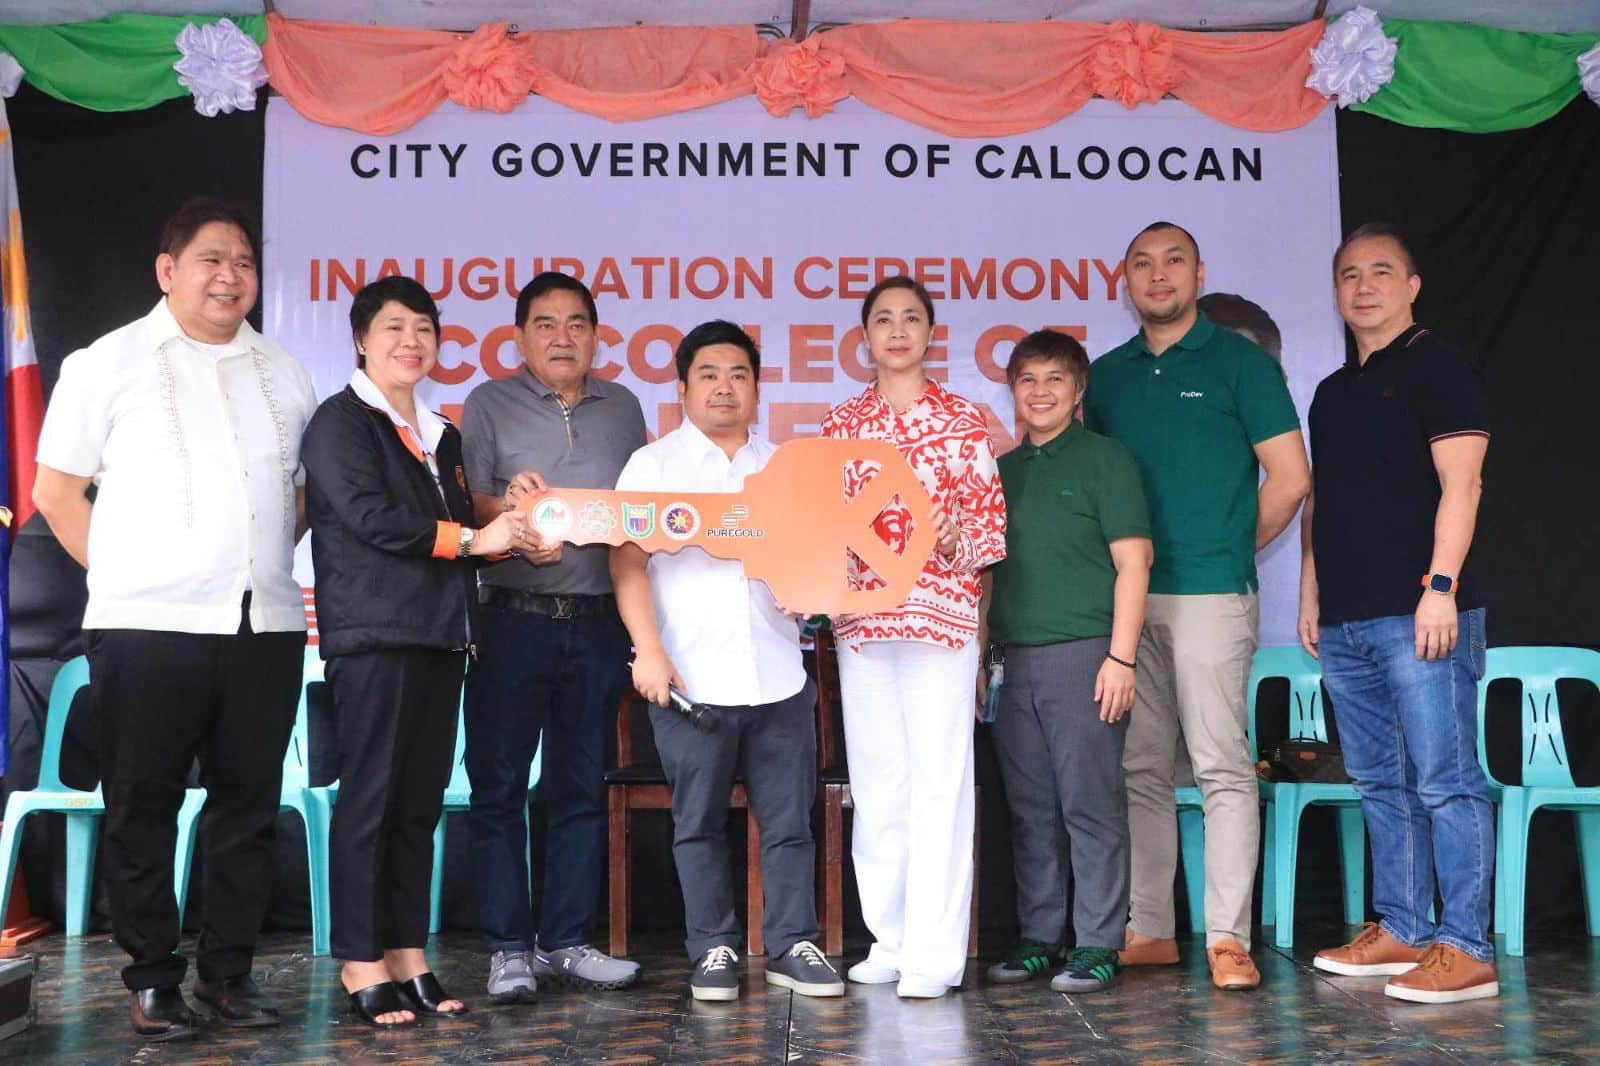 The University of Caloocan City (UCC) has inaugurated a new College of Engineering that will offer free engineering courses to students.